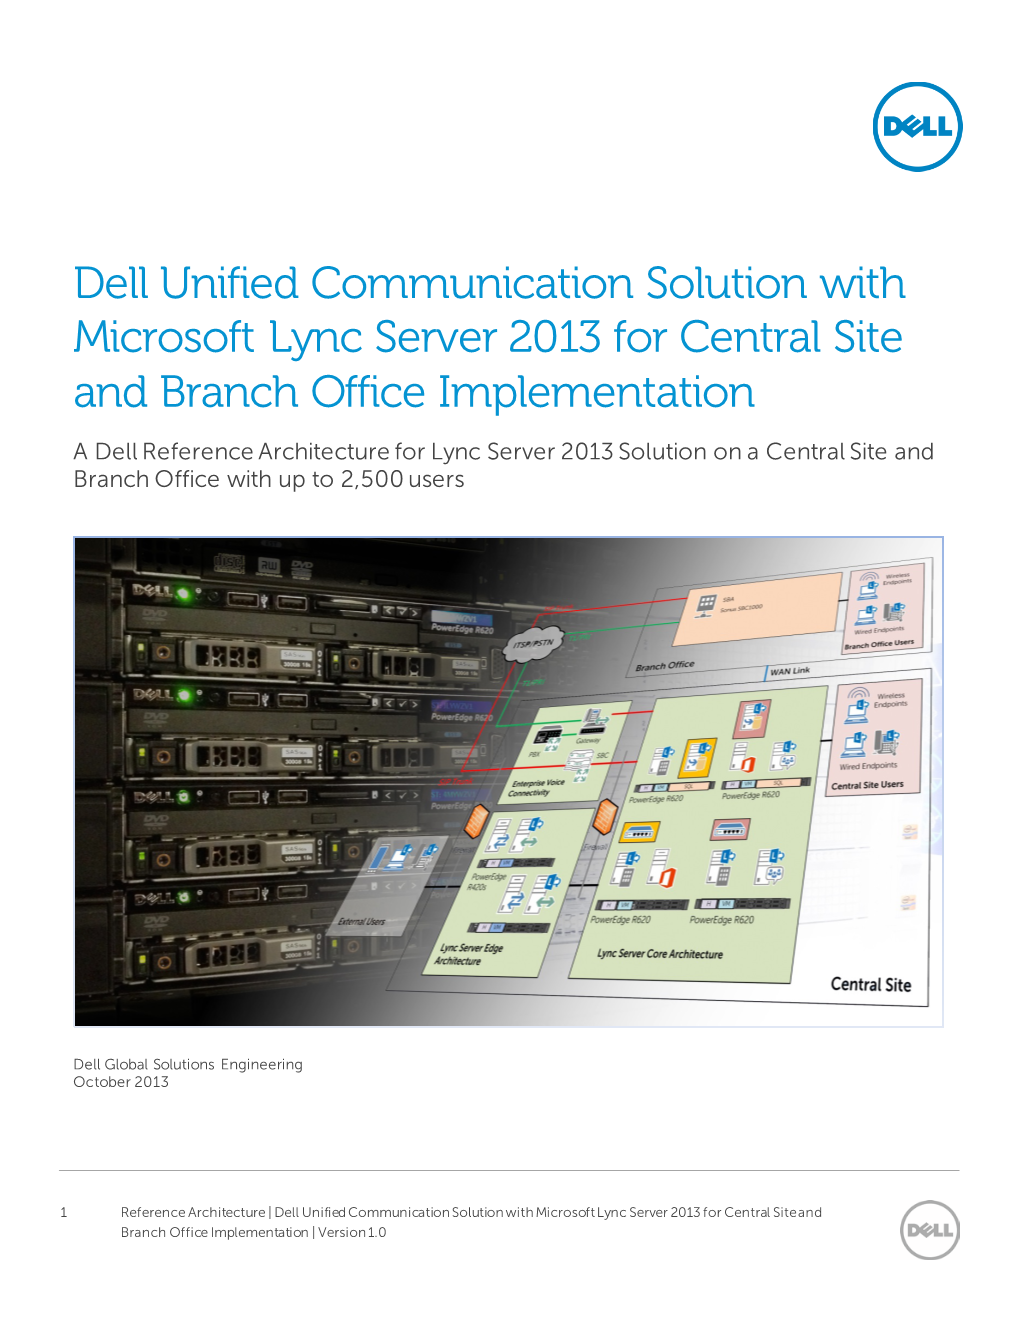 Dell Unified Communication Solution with Microsoft Lync Server 2013 For